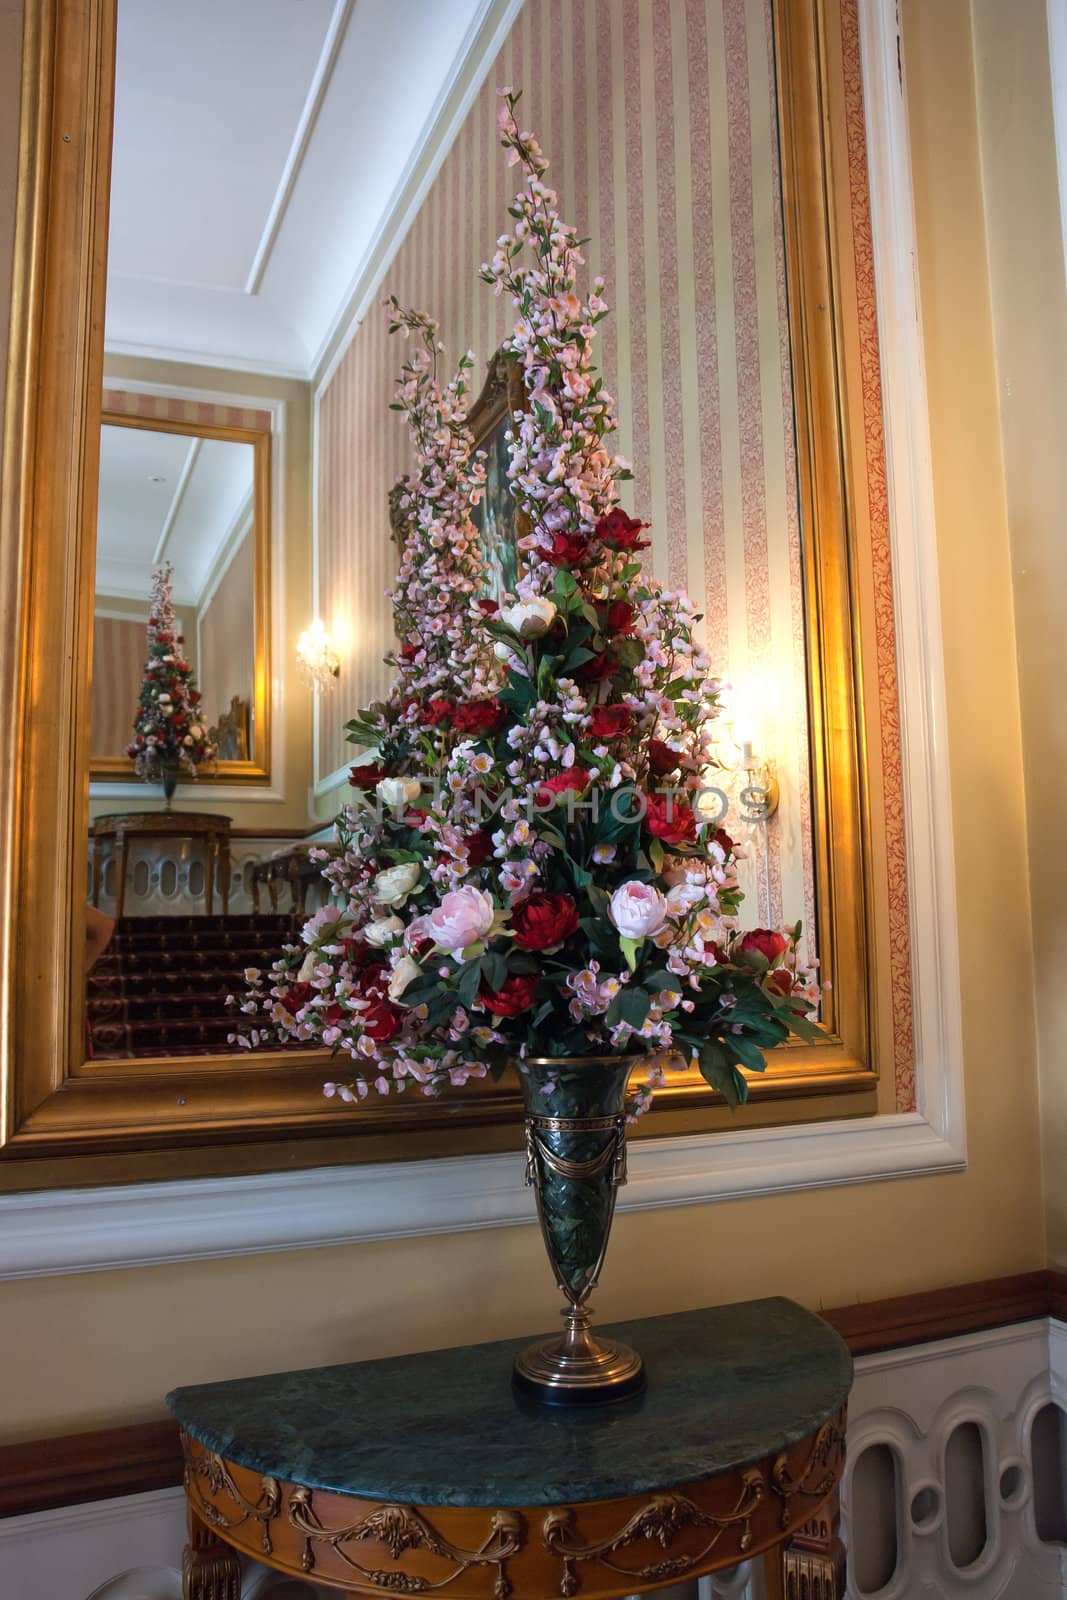 Lobby reception area of a classical castle hotel with beautiful flowers